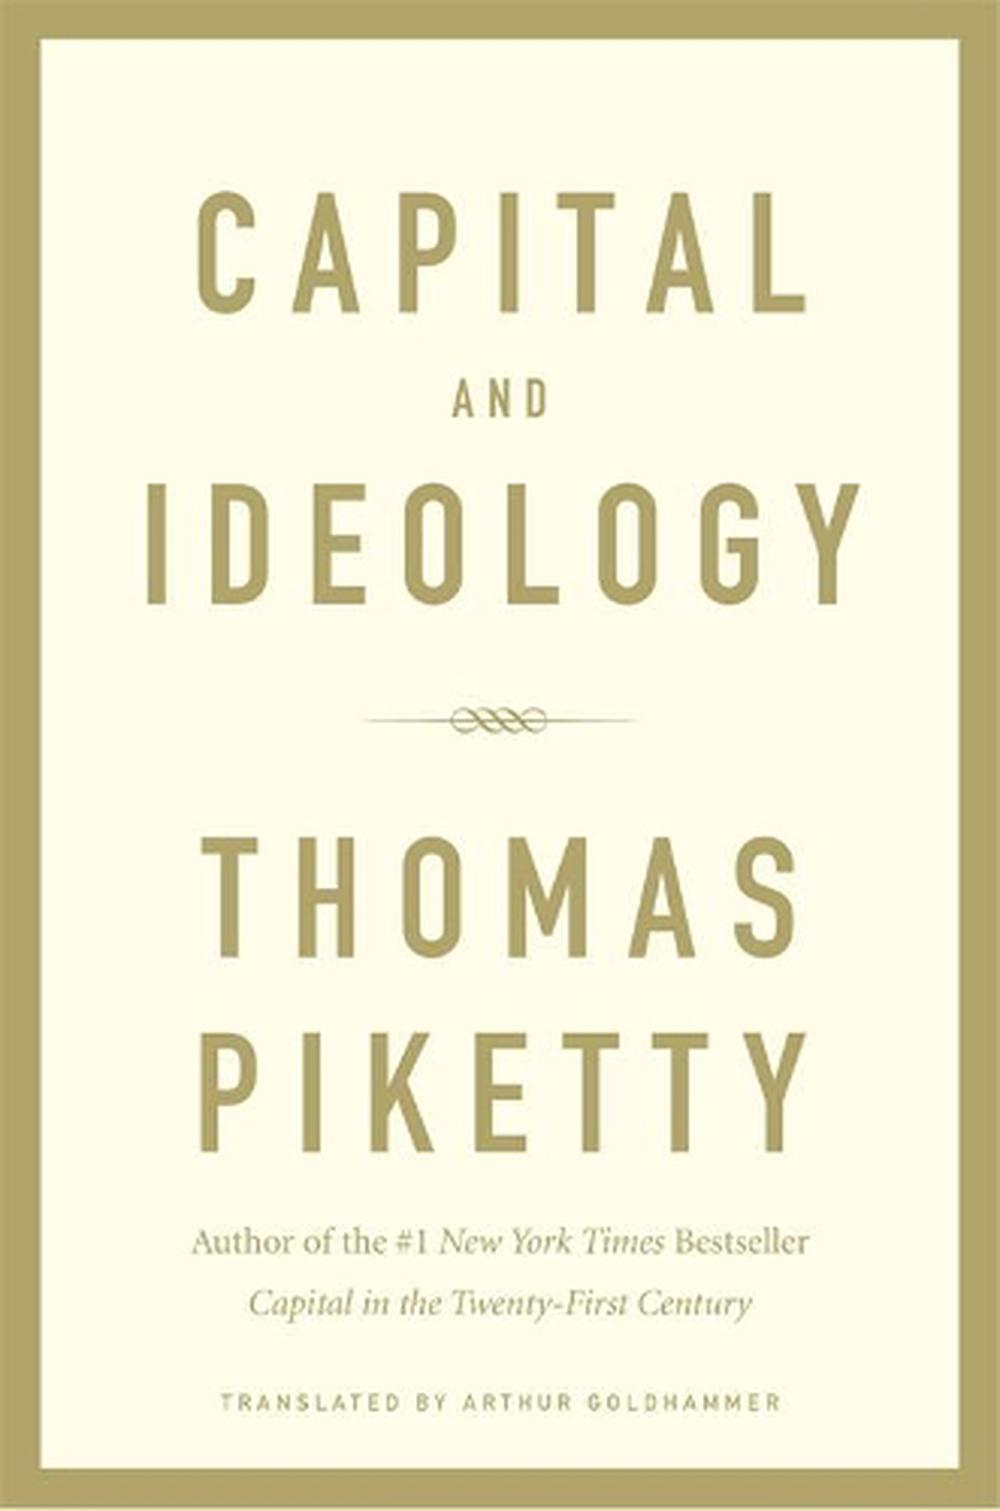 capital and ideology by thomas piketty